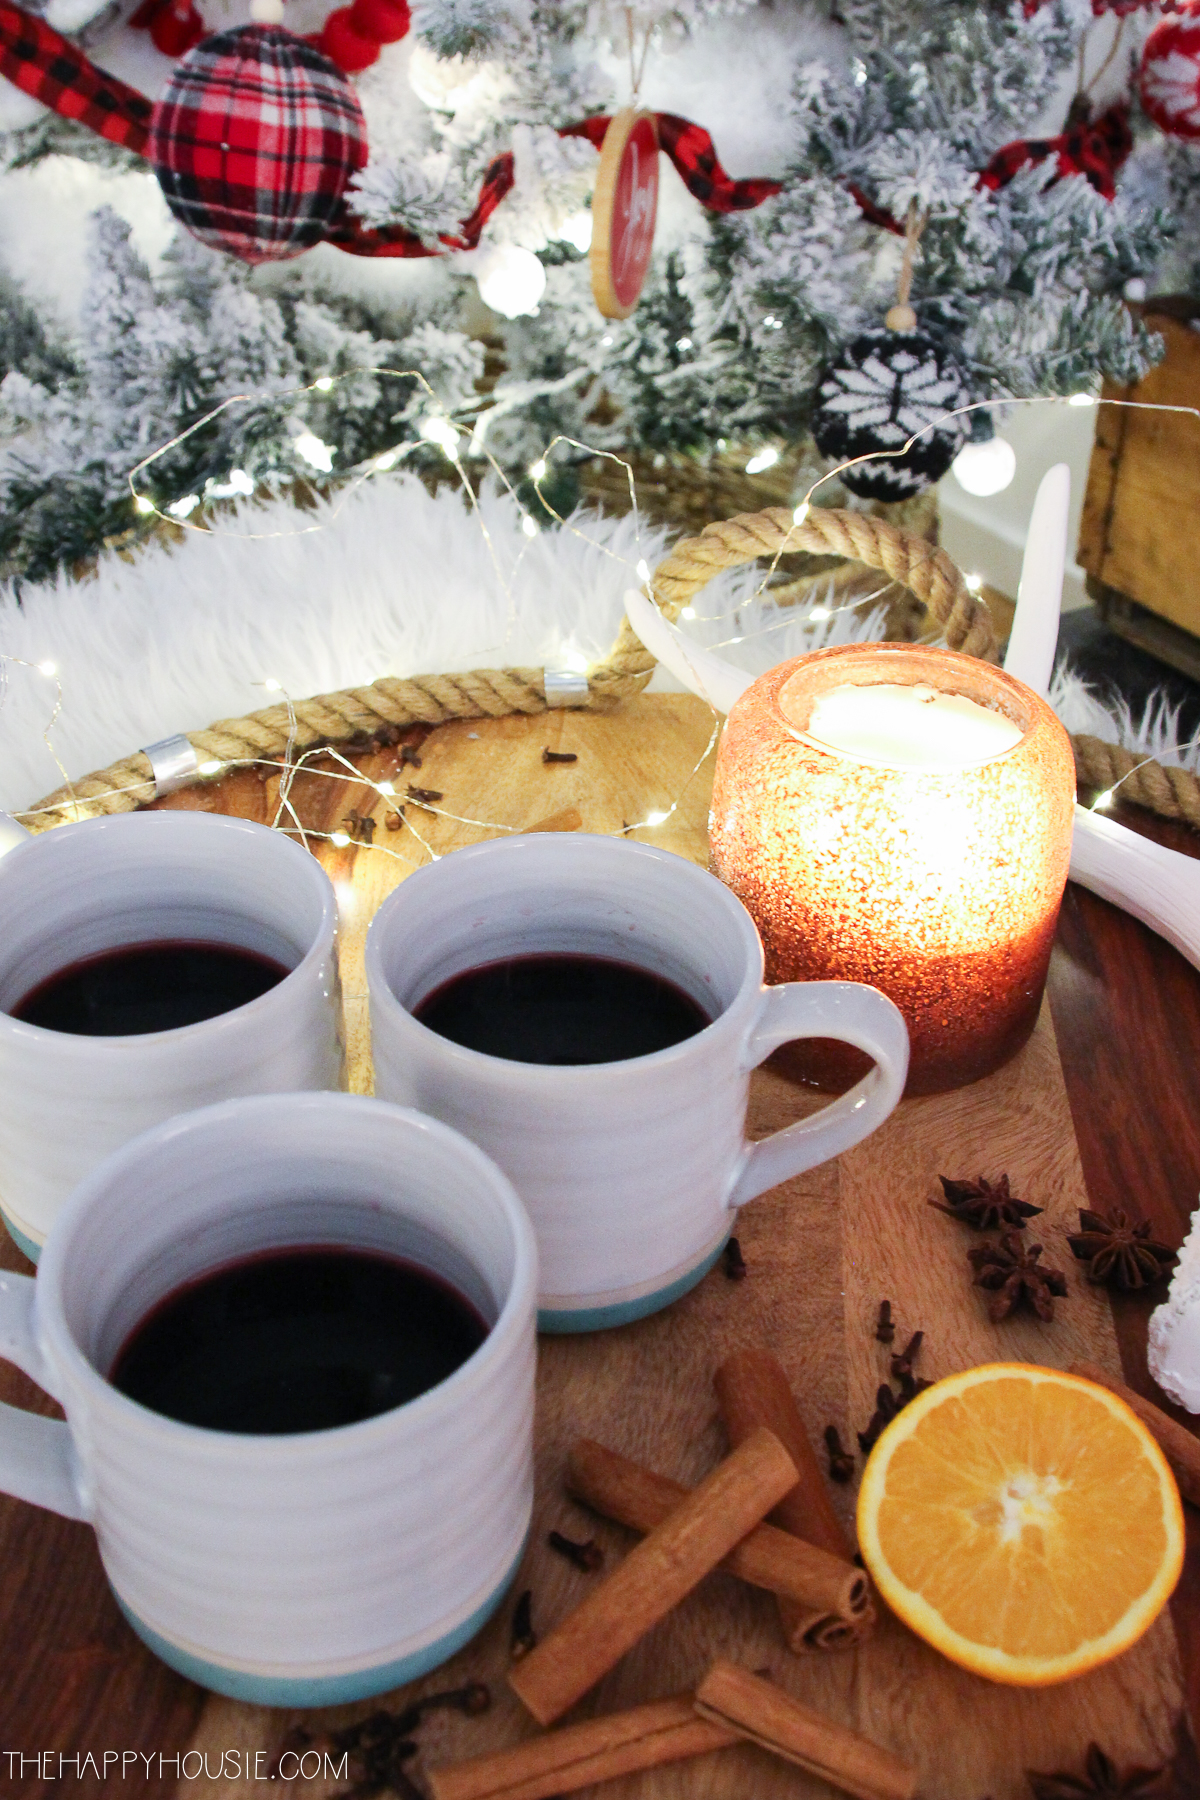 Mulled wine in mugs beside a lit candle in a votive.